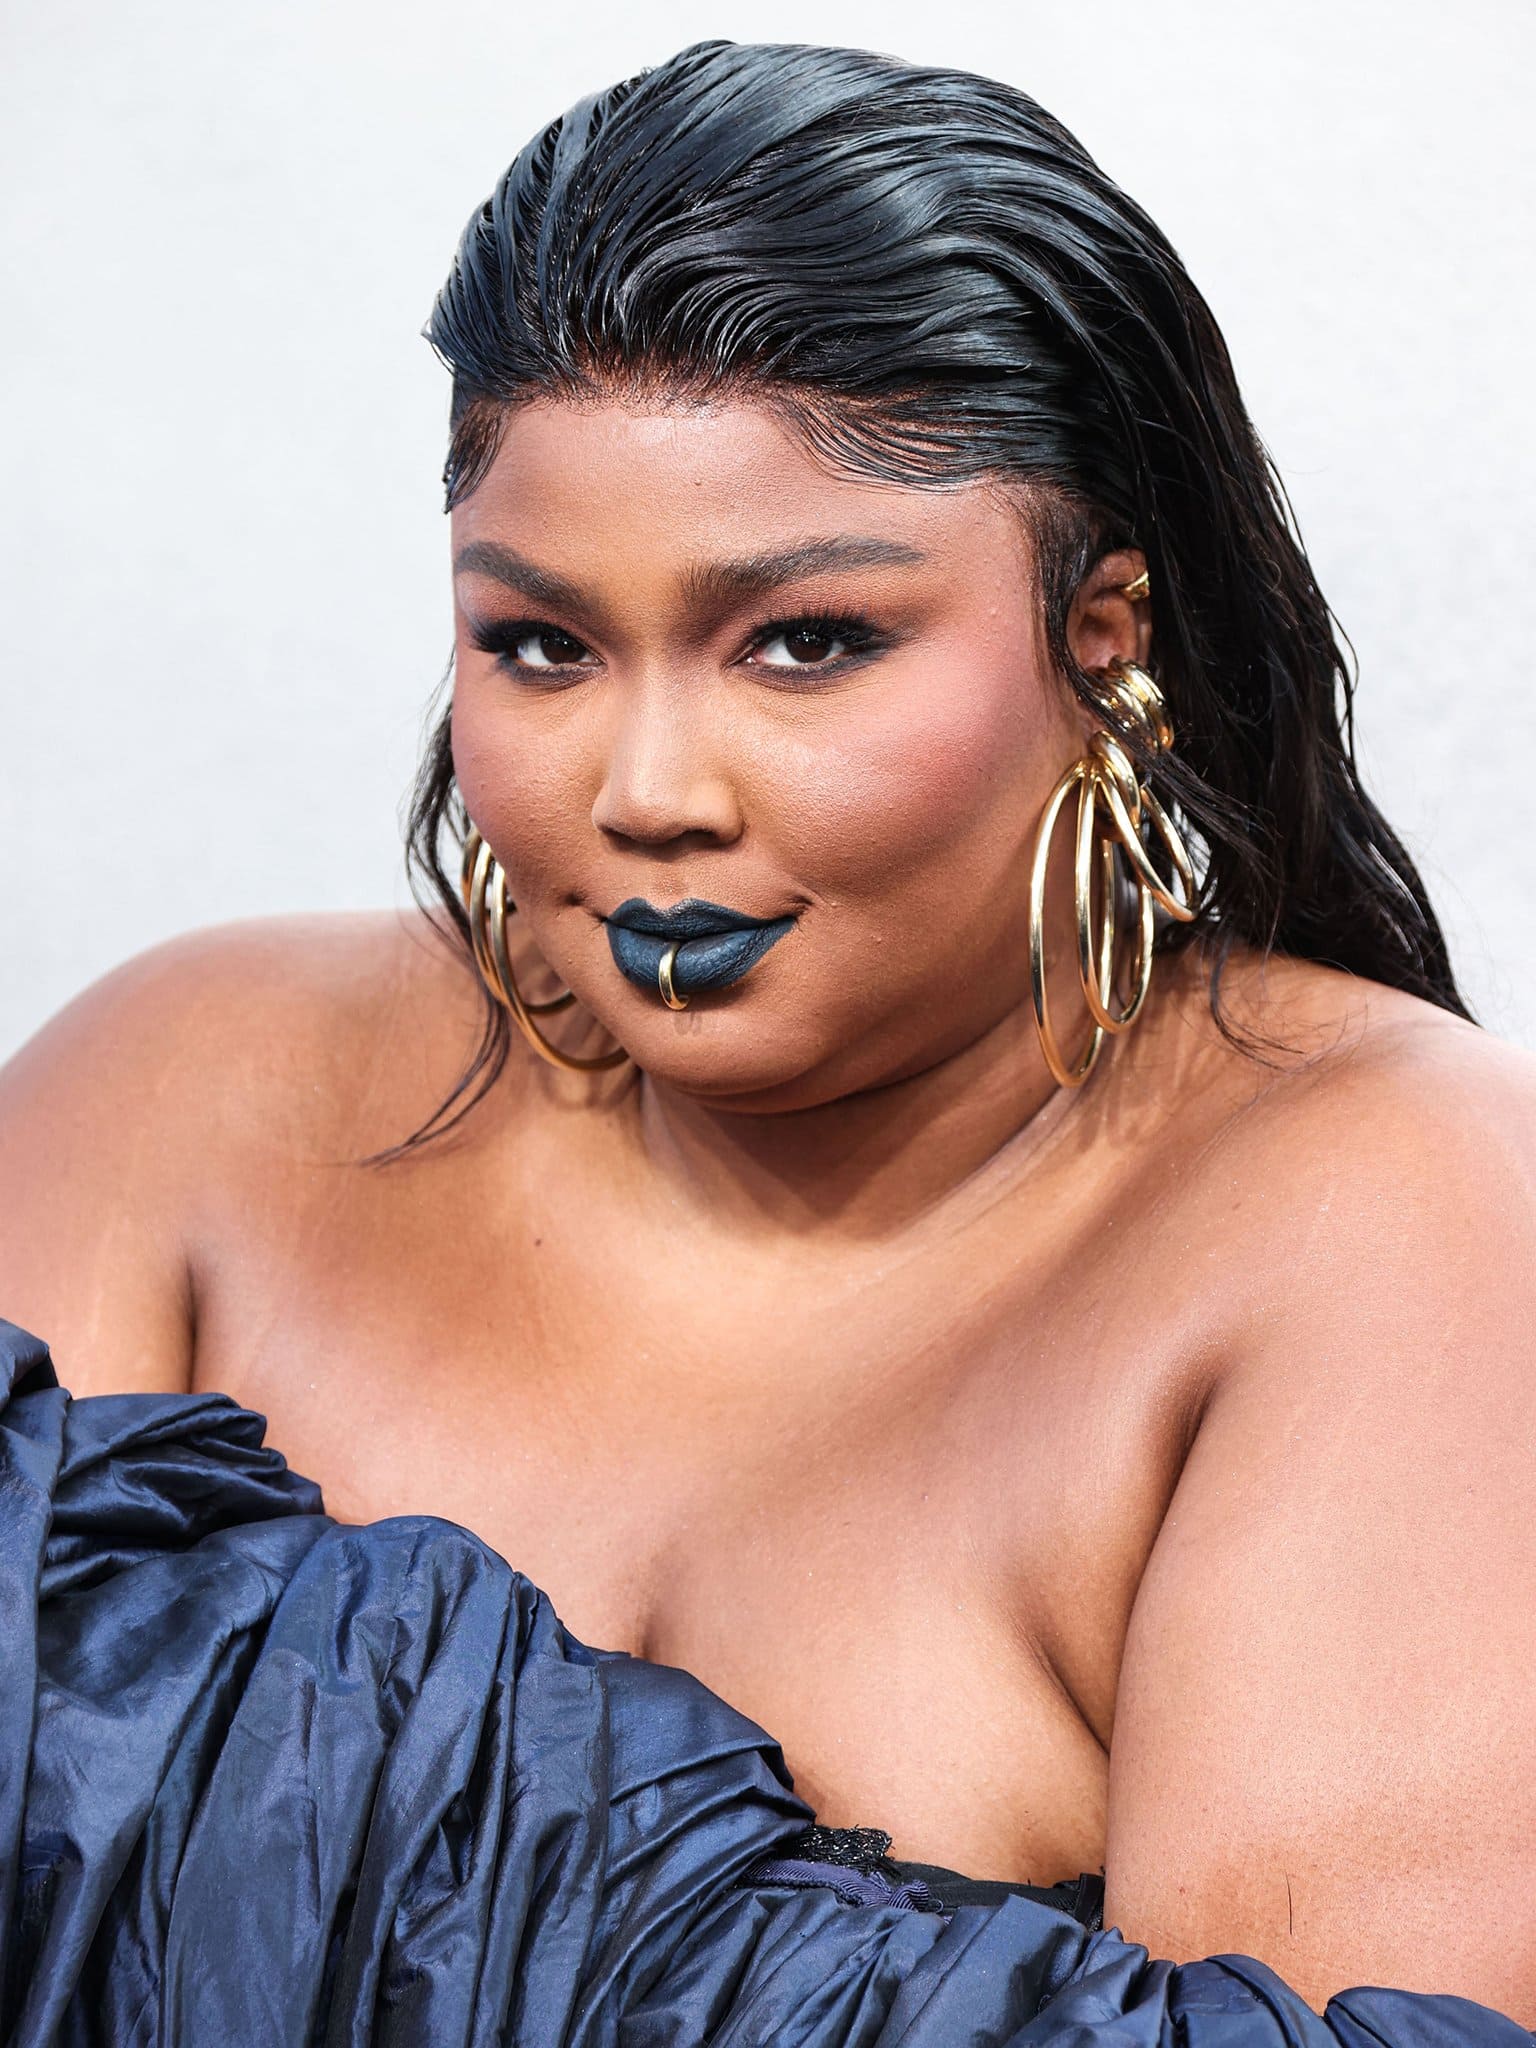 Lizzo finishes off her gothic-glam look with slicked-back wet-look hairstyle and cerulean lipstick